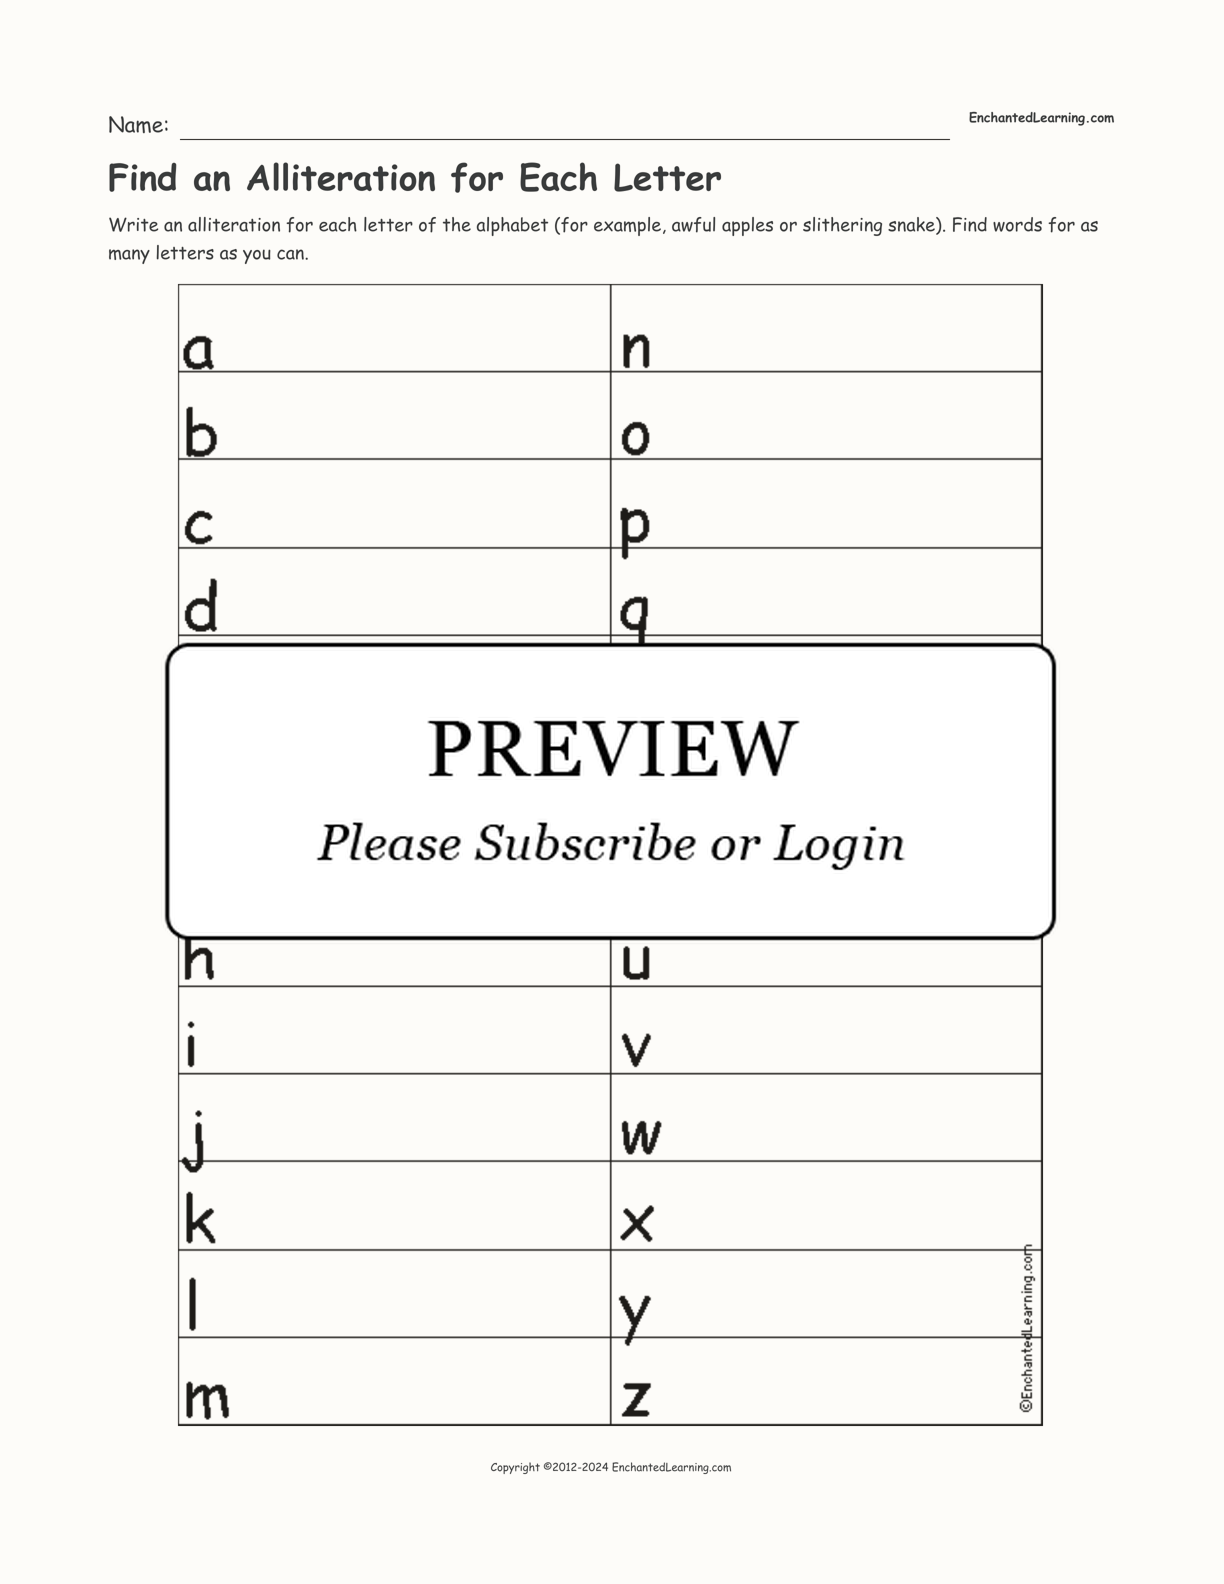 Find an Alliteration for Each Letter interactive worksheet page 1